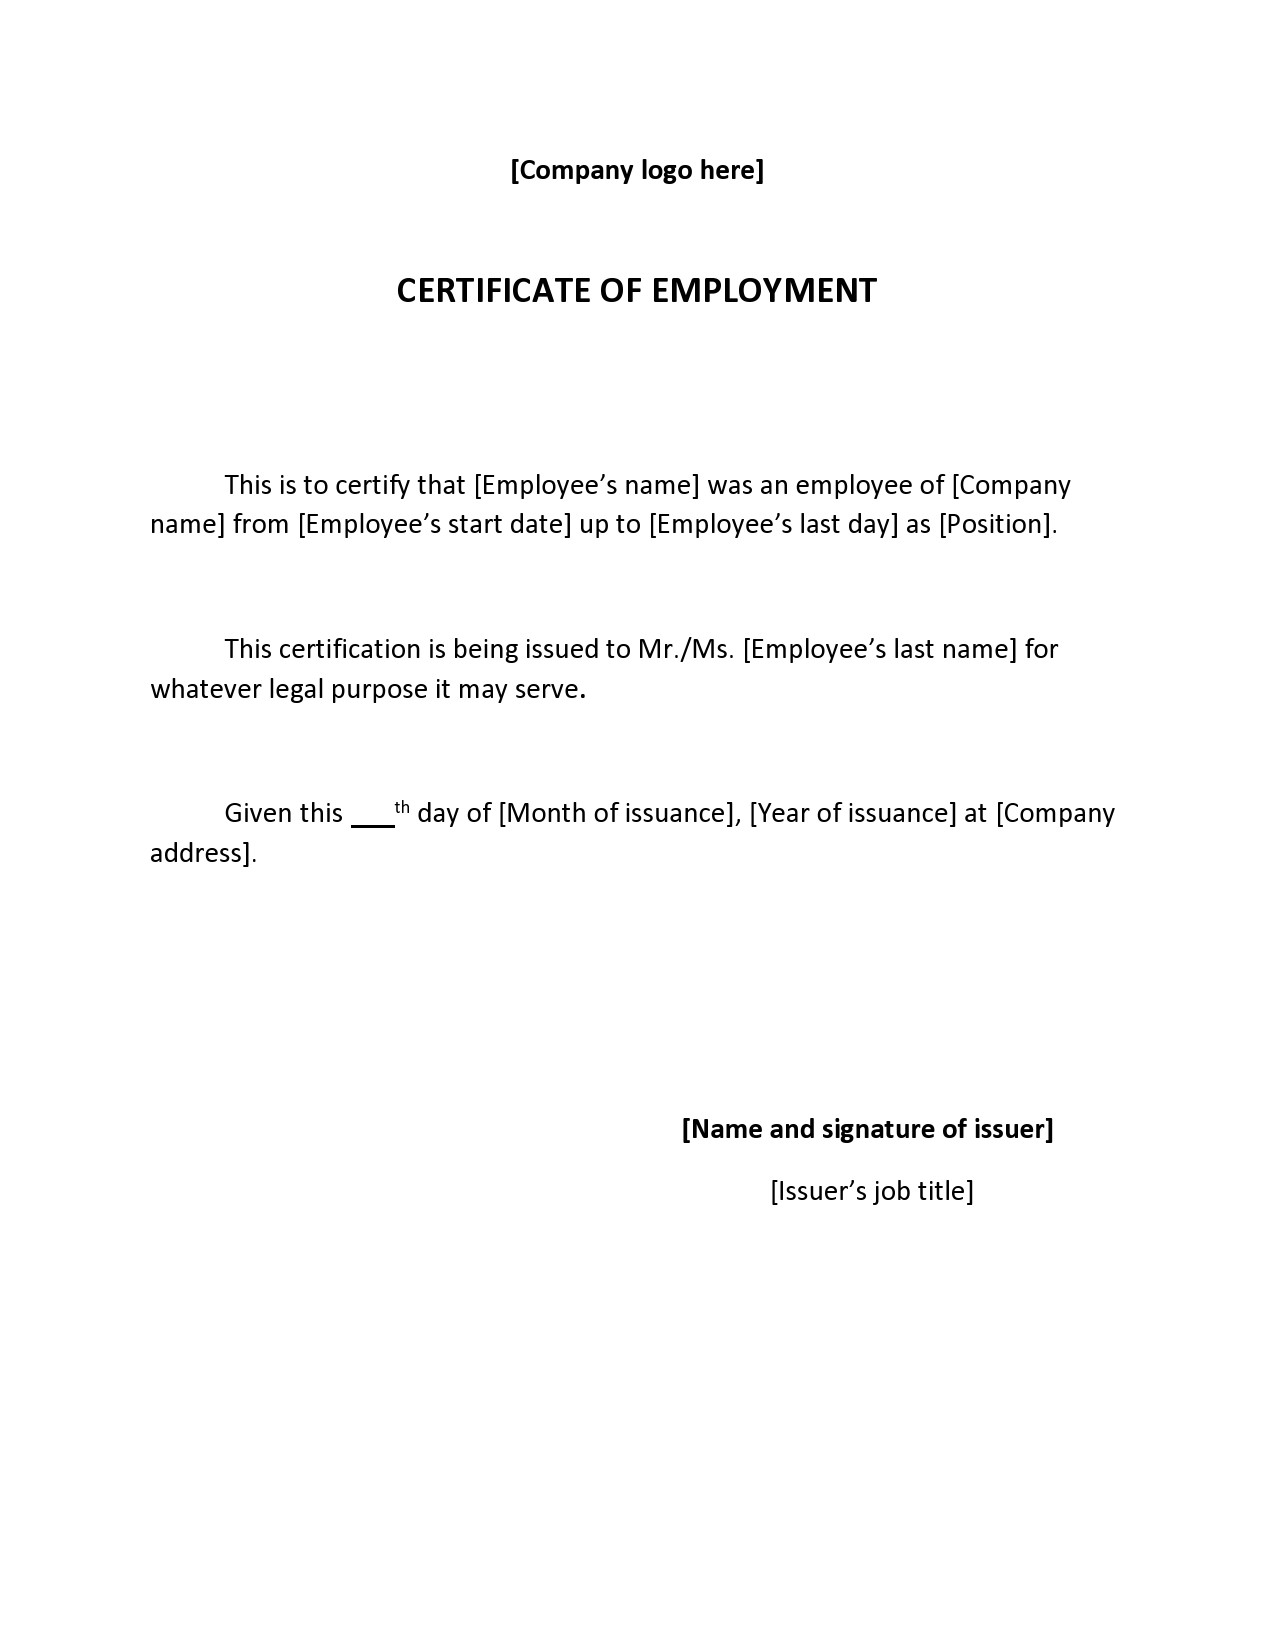 Sample Certificate Of Employment For Resigned Employee ~ Sample